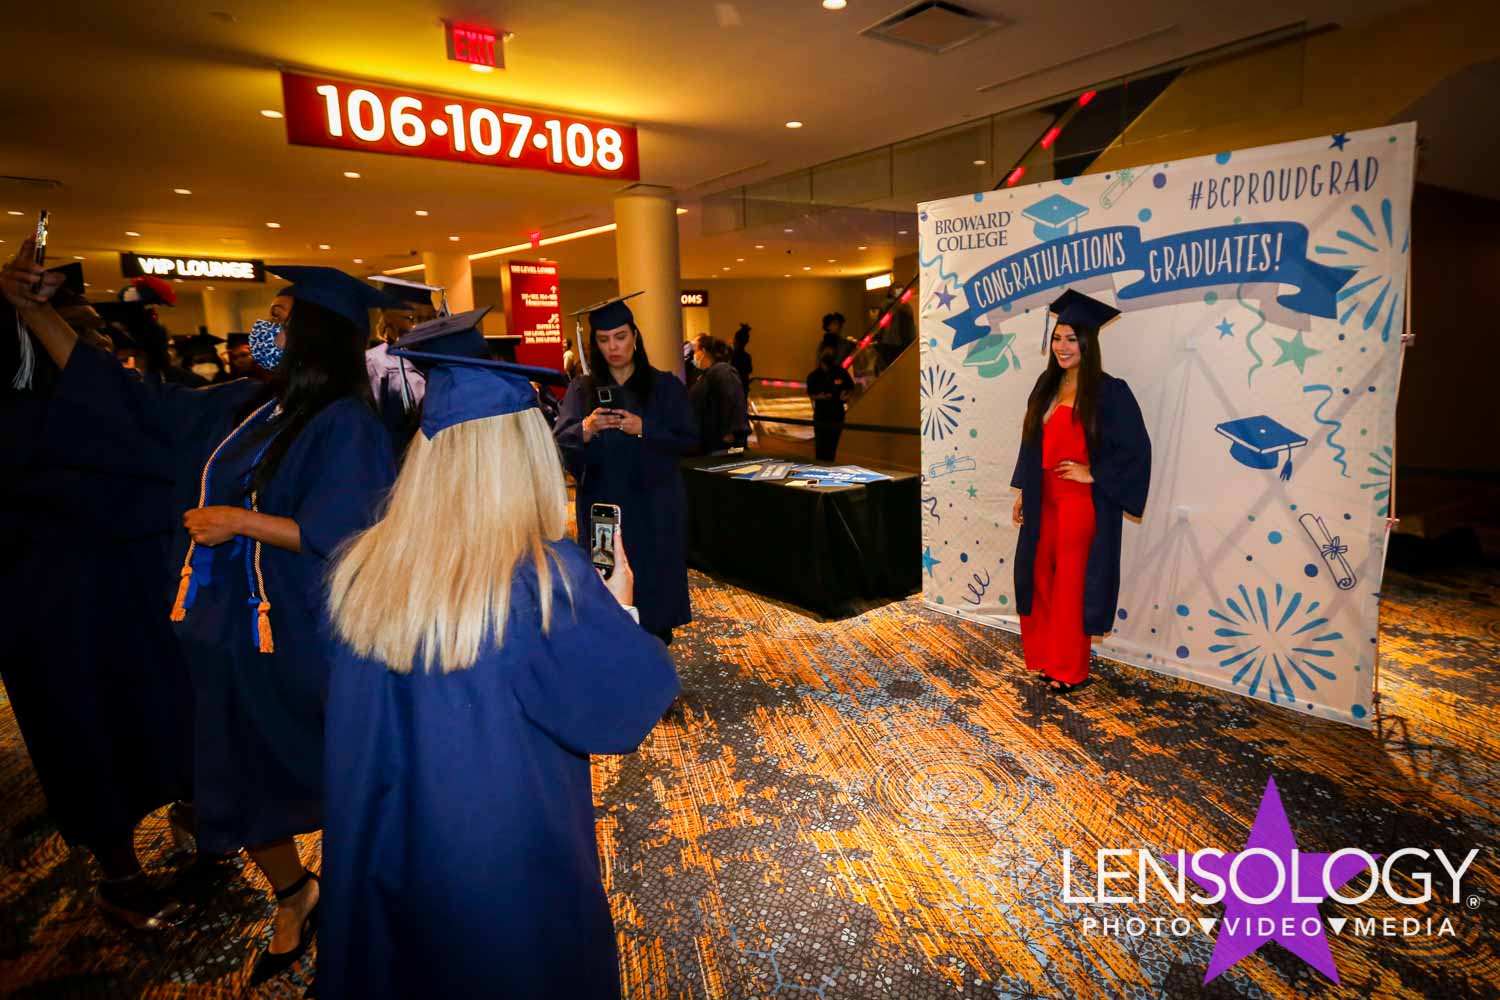 LENSOLOGY.NET - Broward college graduation, roving photographer at Hard Rock Casino, Fort Lauderdale, FL.All images are copyright of Lensology.netEmail: info@lensology.netwww.lensology.net